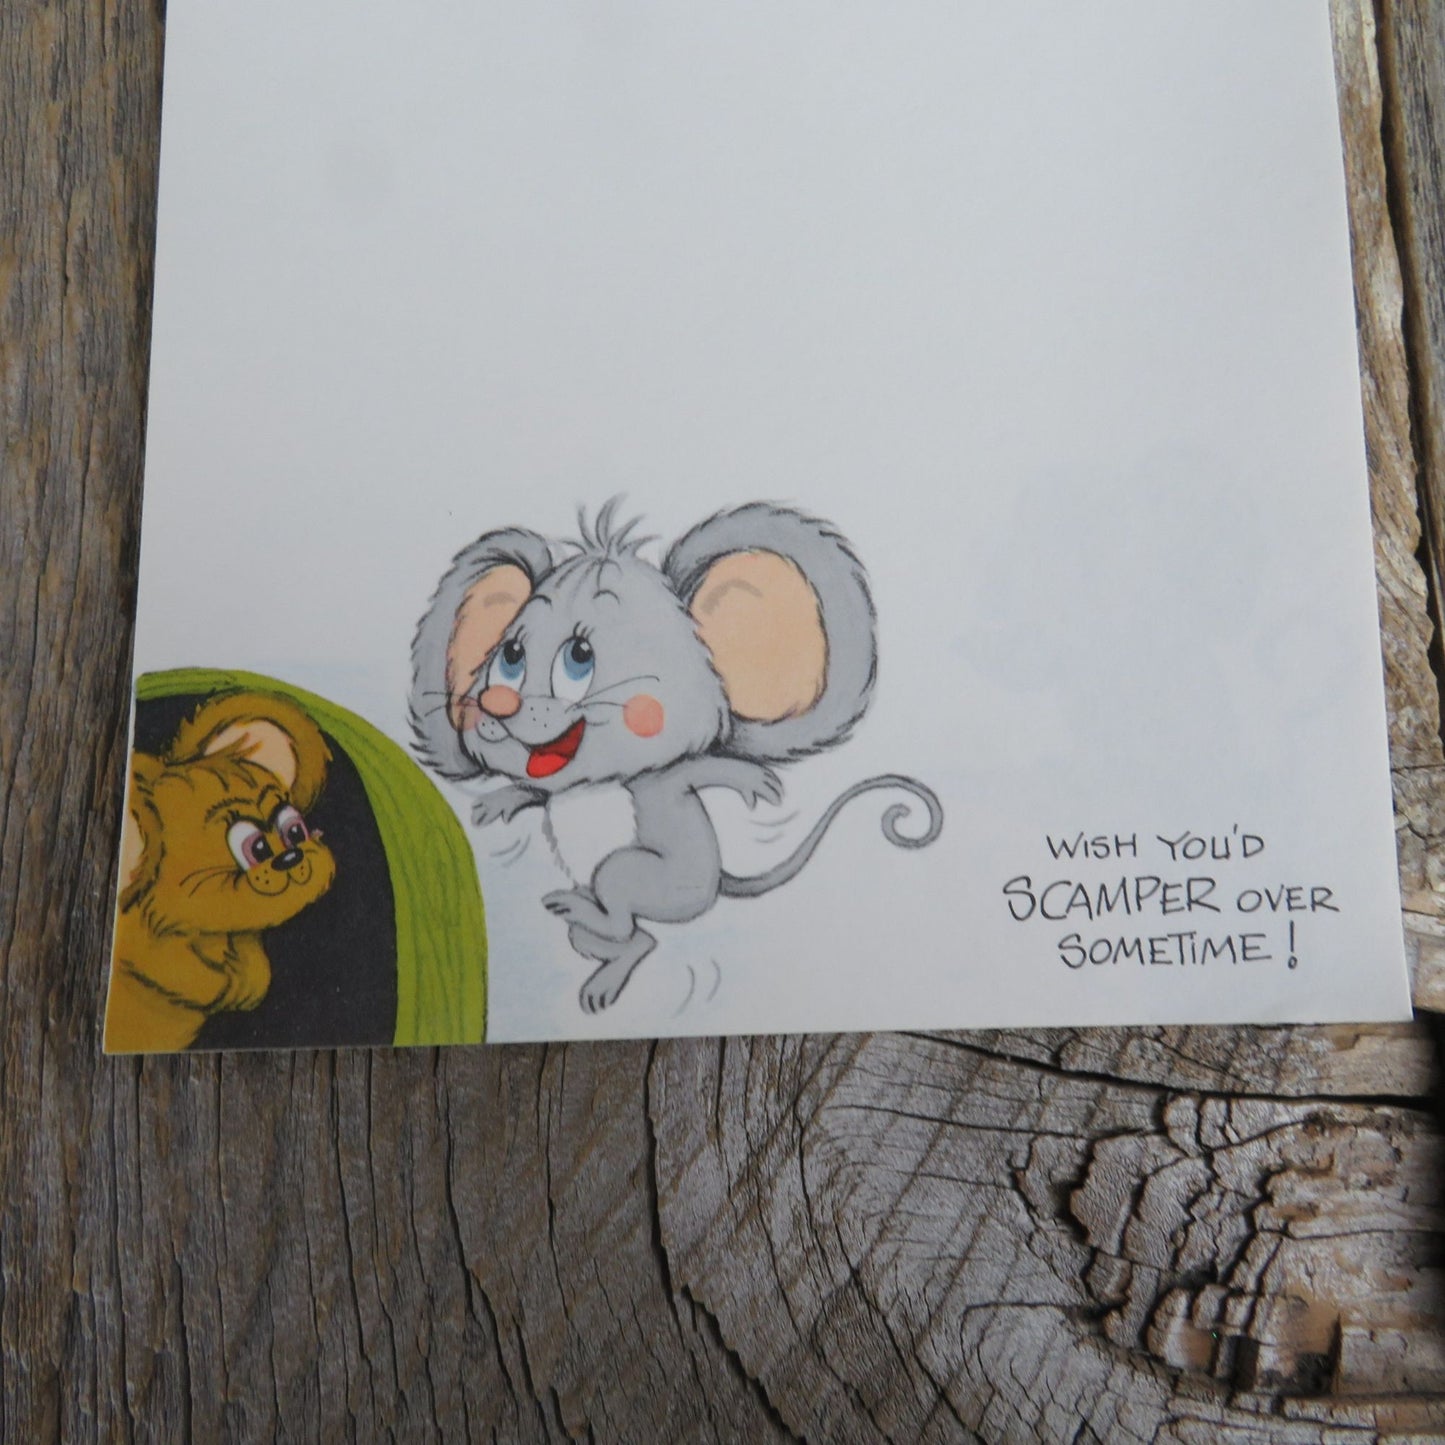 Vintage Cute Mouse Writing Paper Pad Stationery Pip Squeaks Tablet Vagabond Creations